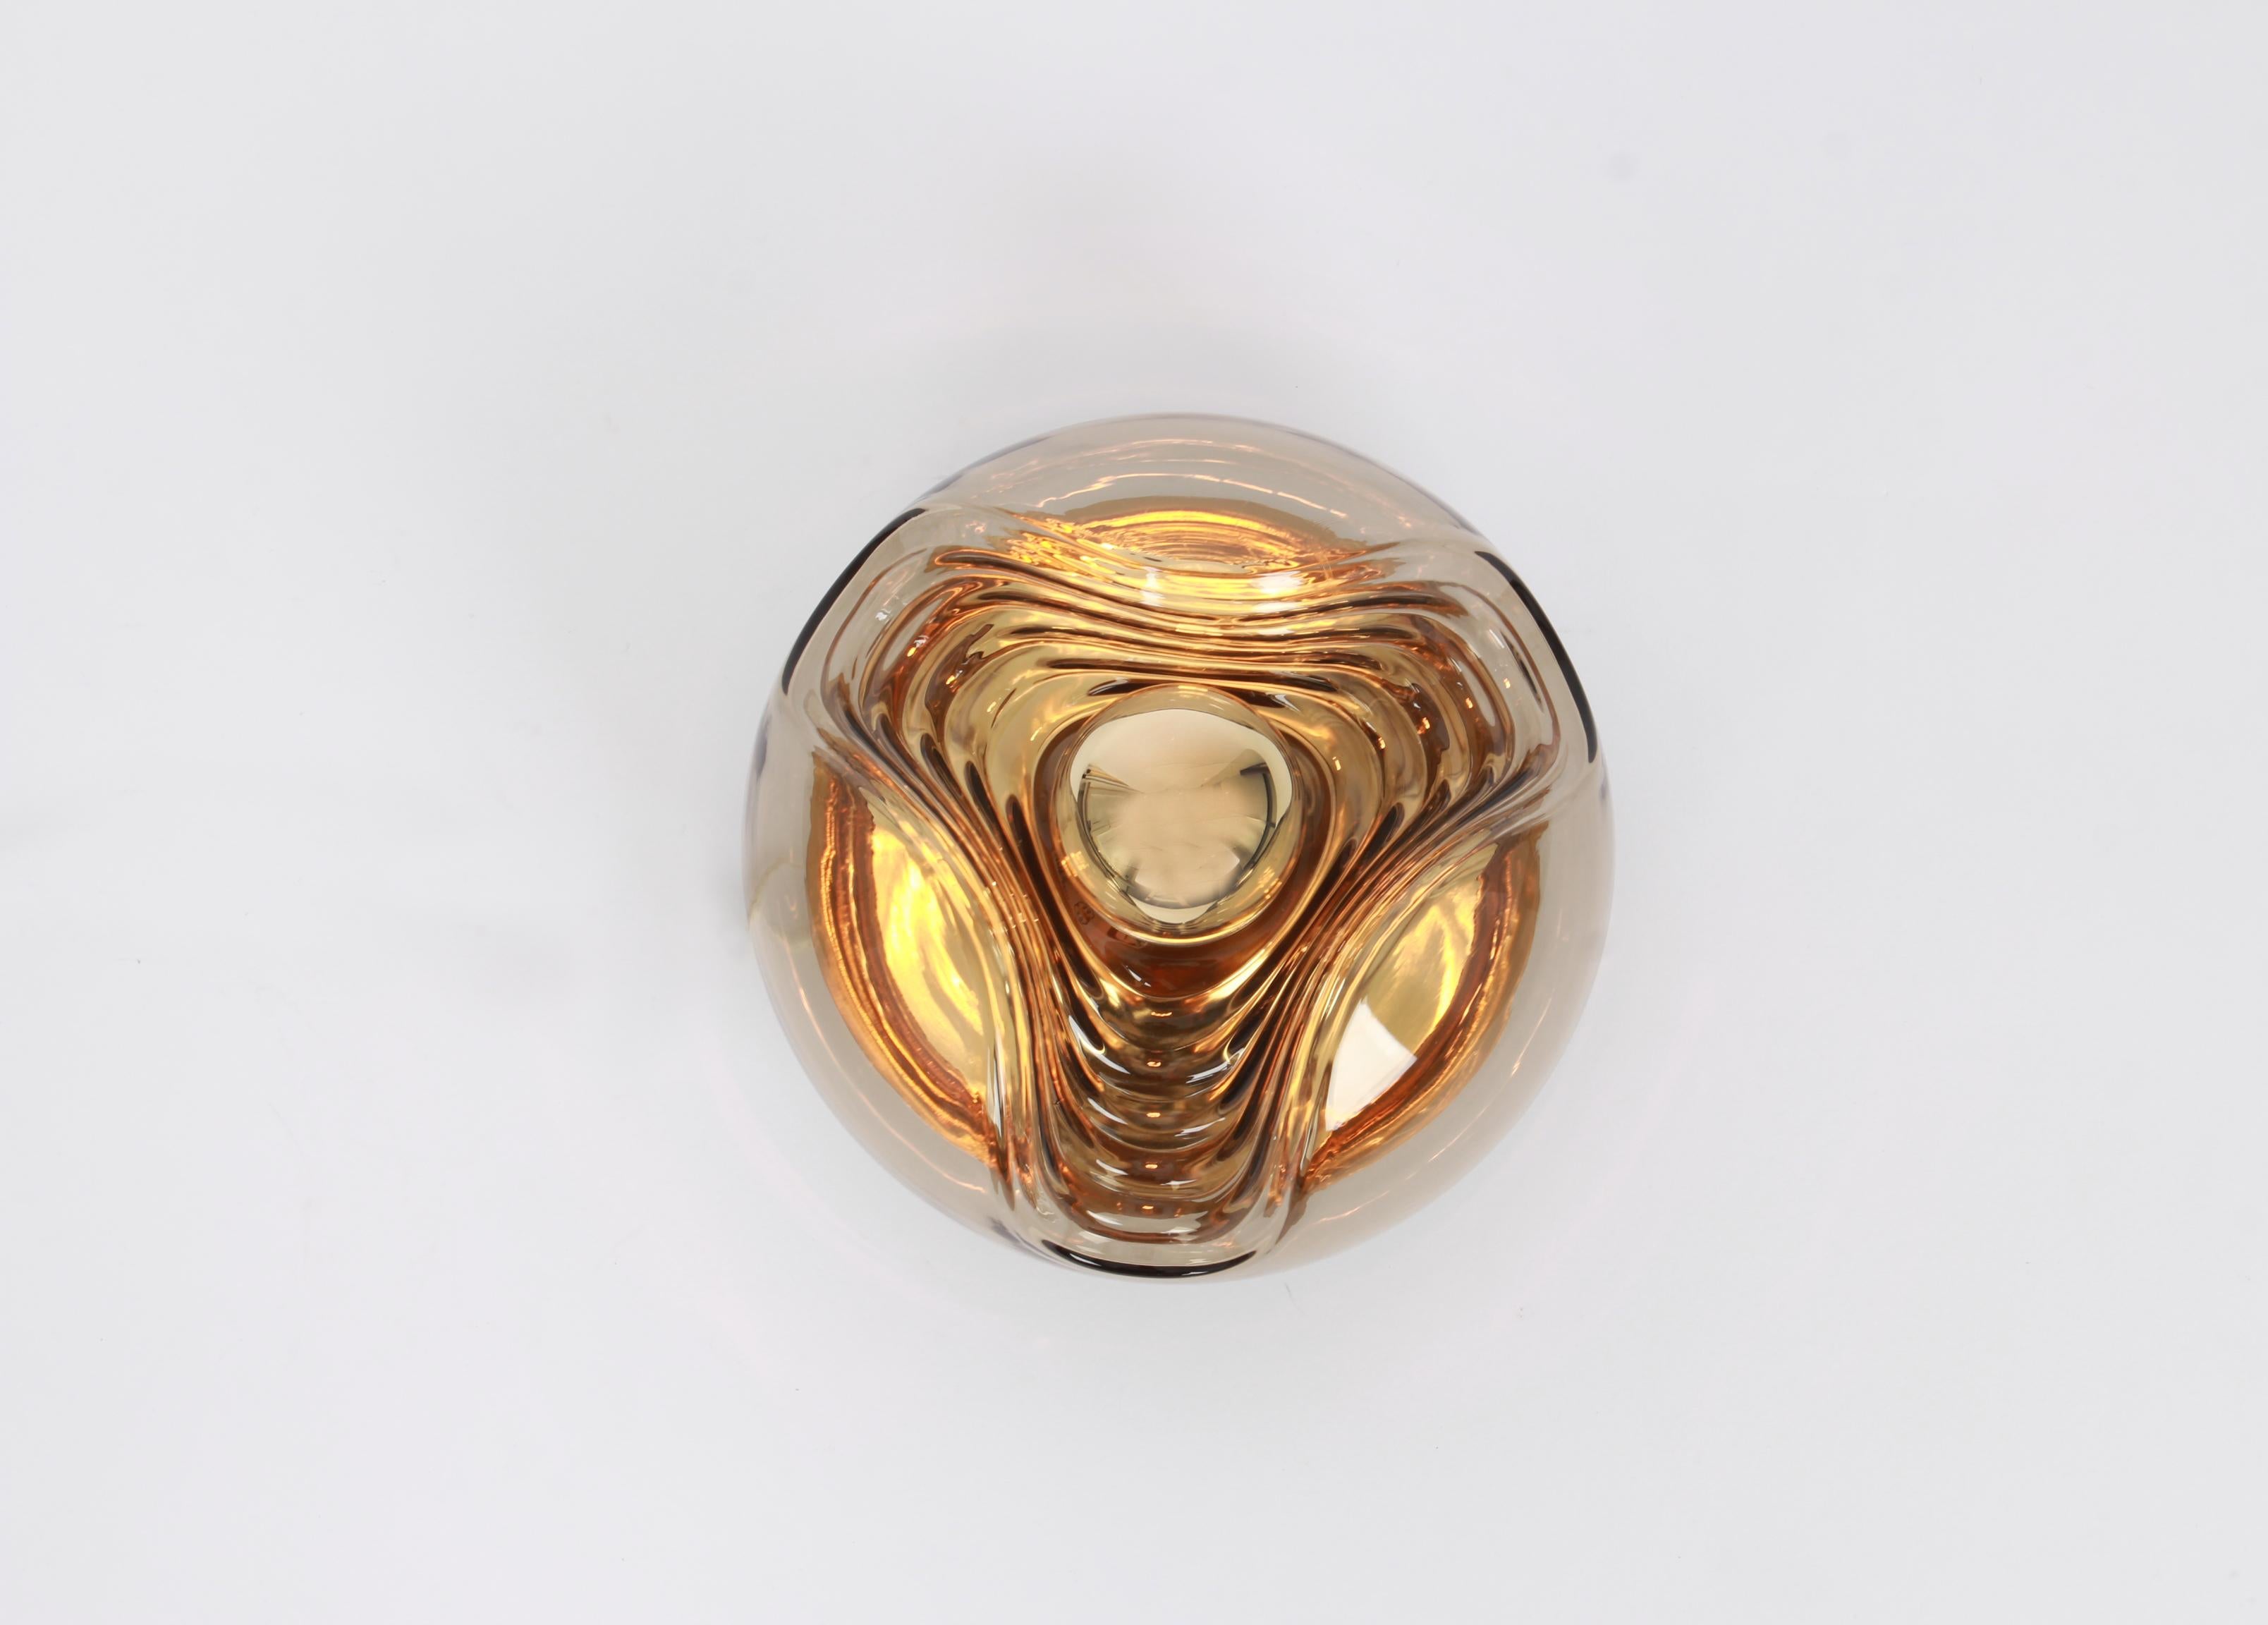 A special round biomorphic smoked glass wall sconce designed by Koch & Lowy for Peill & Putzler, manufactured in Germany, circa 1970s.

Sockets: One x E27 standard bulb. (100 W max).-
Light bulbs are not included. It is possible to install this